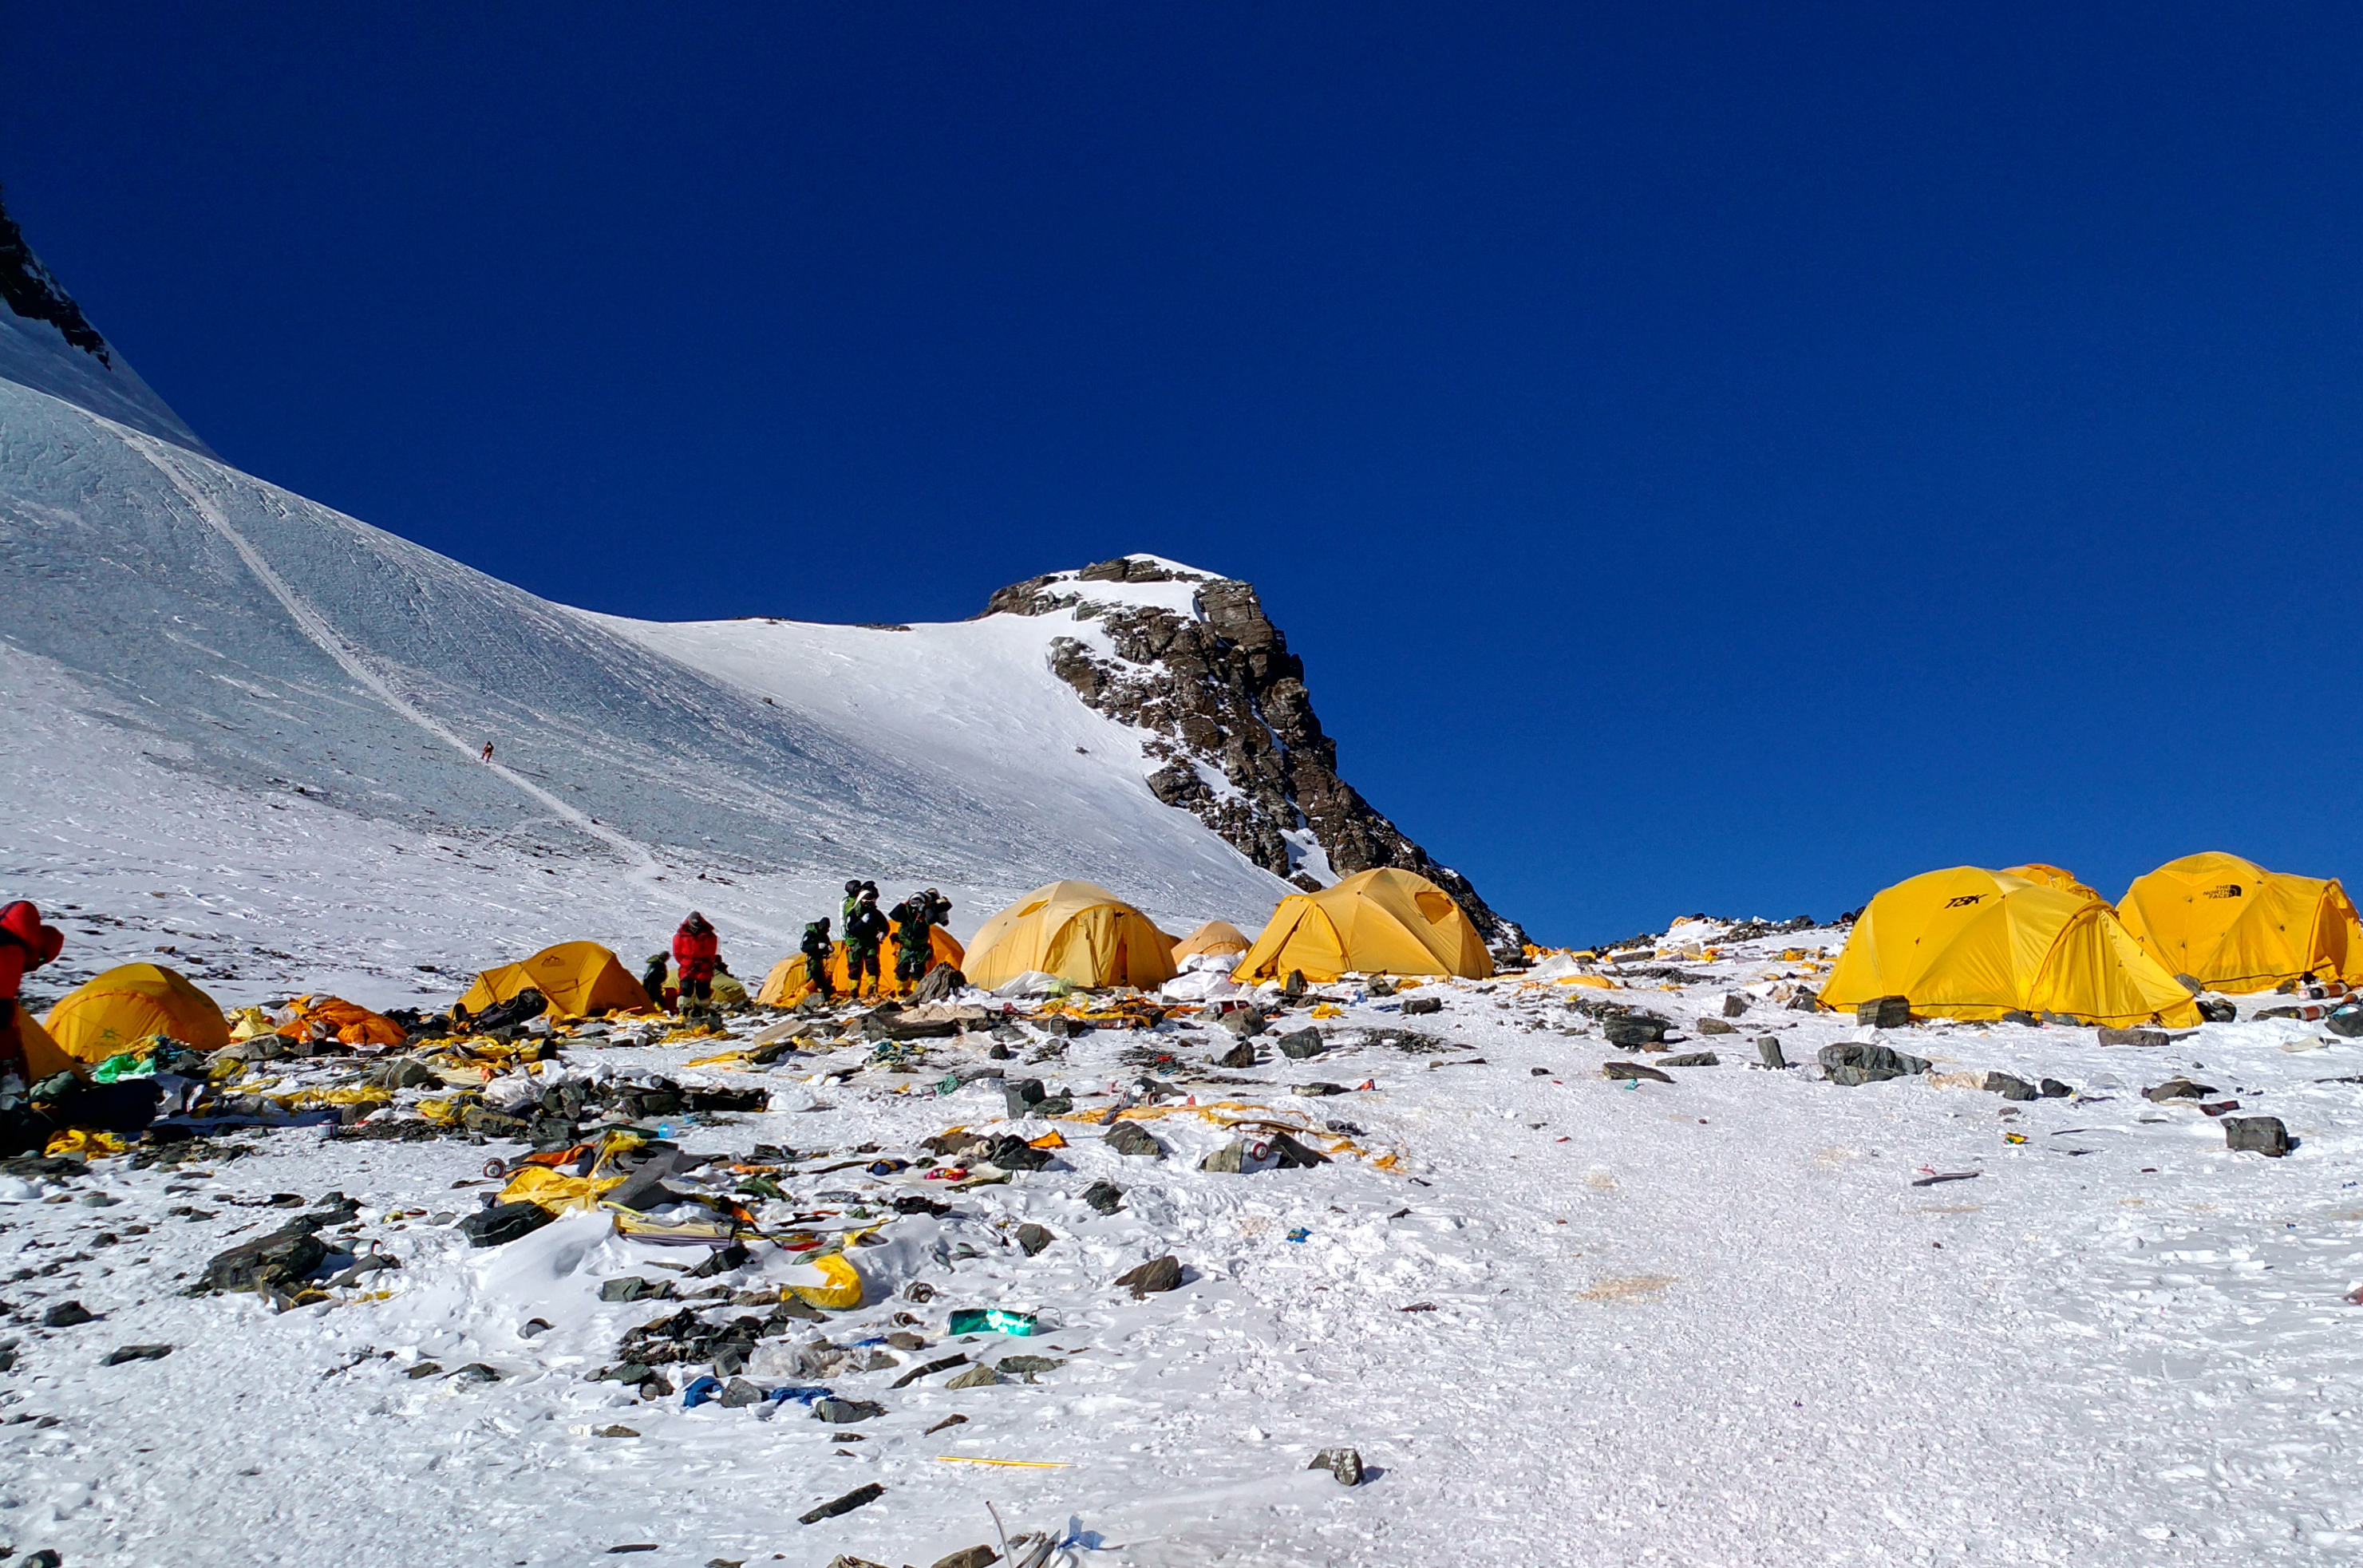 Everest welcomes more and more climbers and is awash in their waste